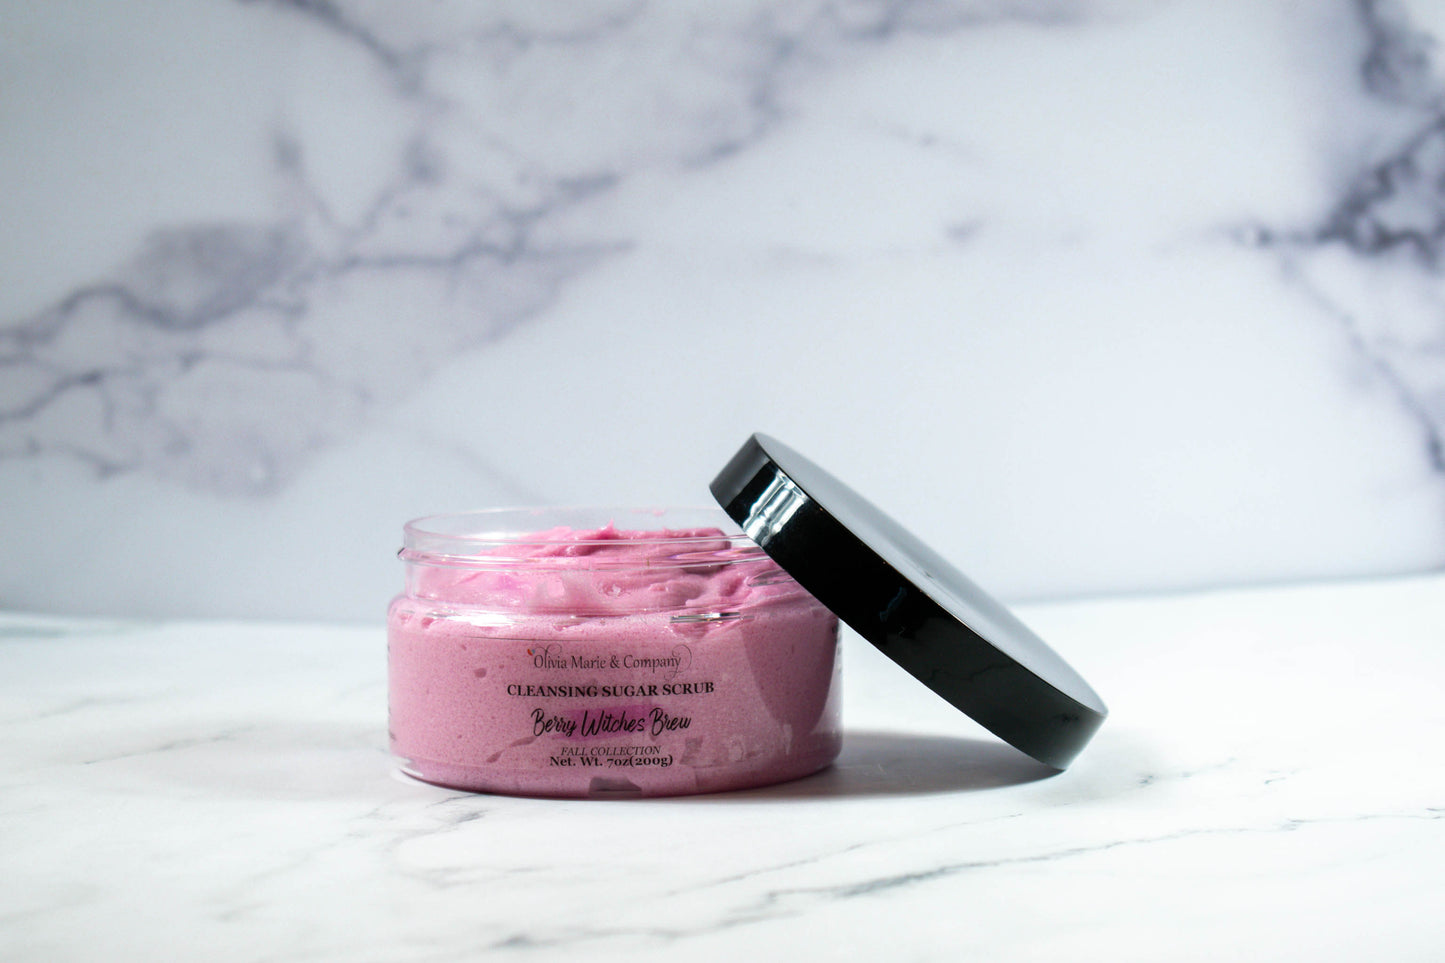 Berry witches brew sugar scrub tinted in a light purple